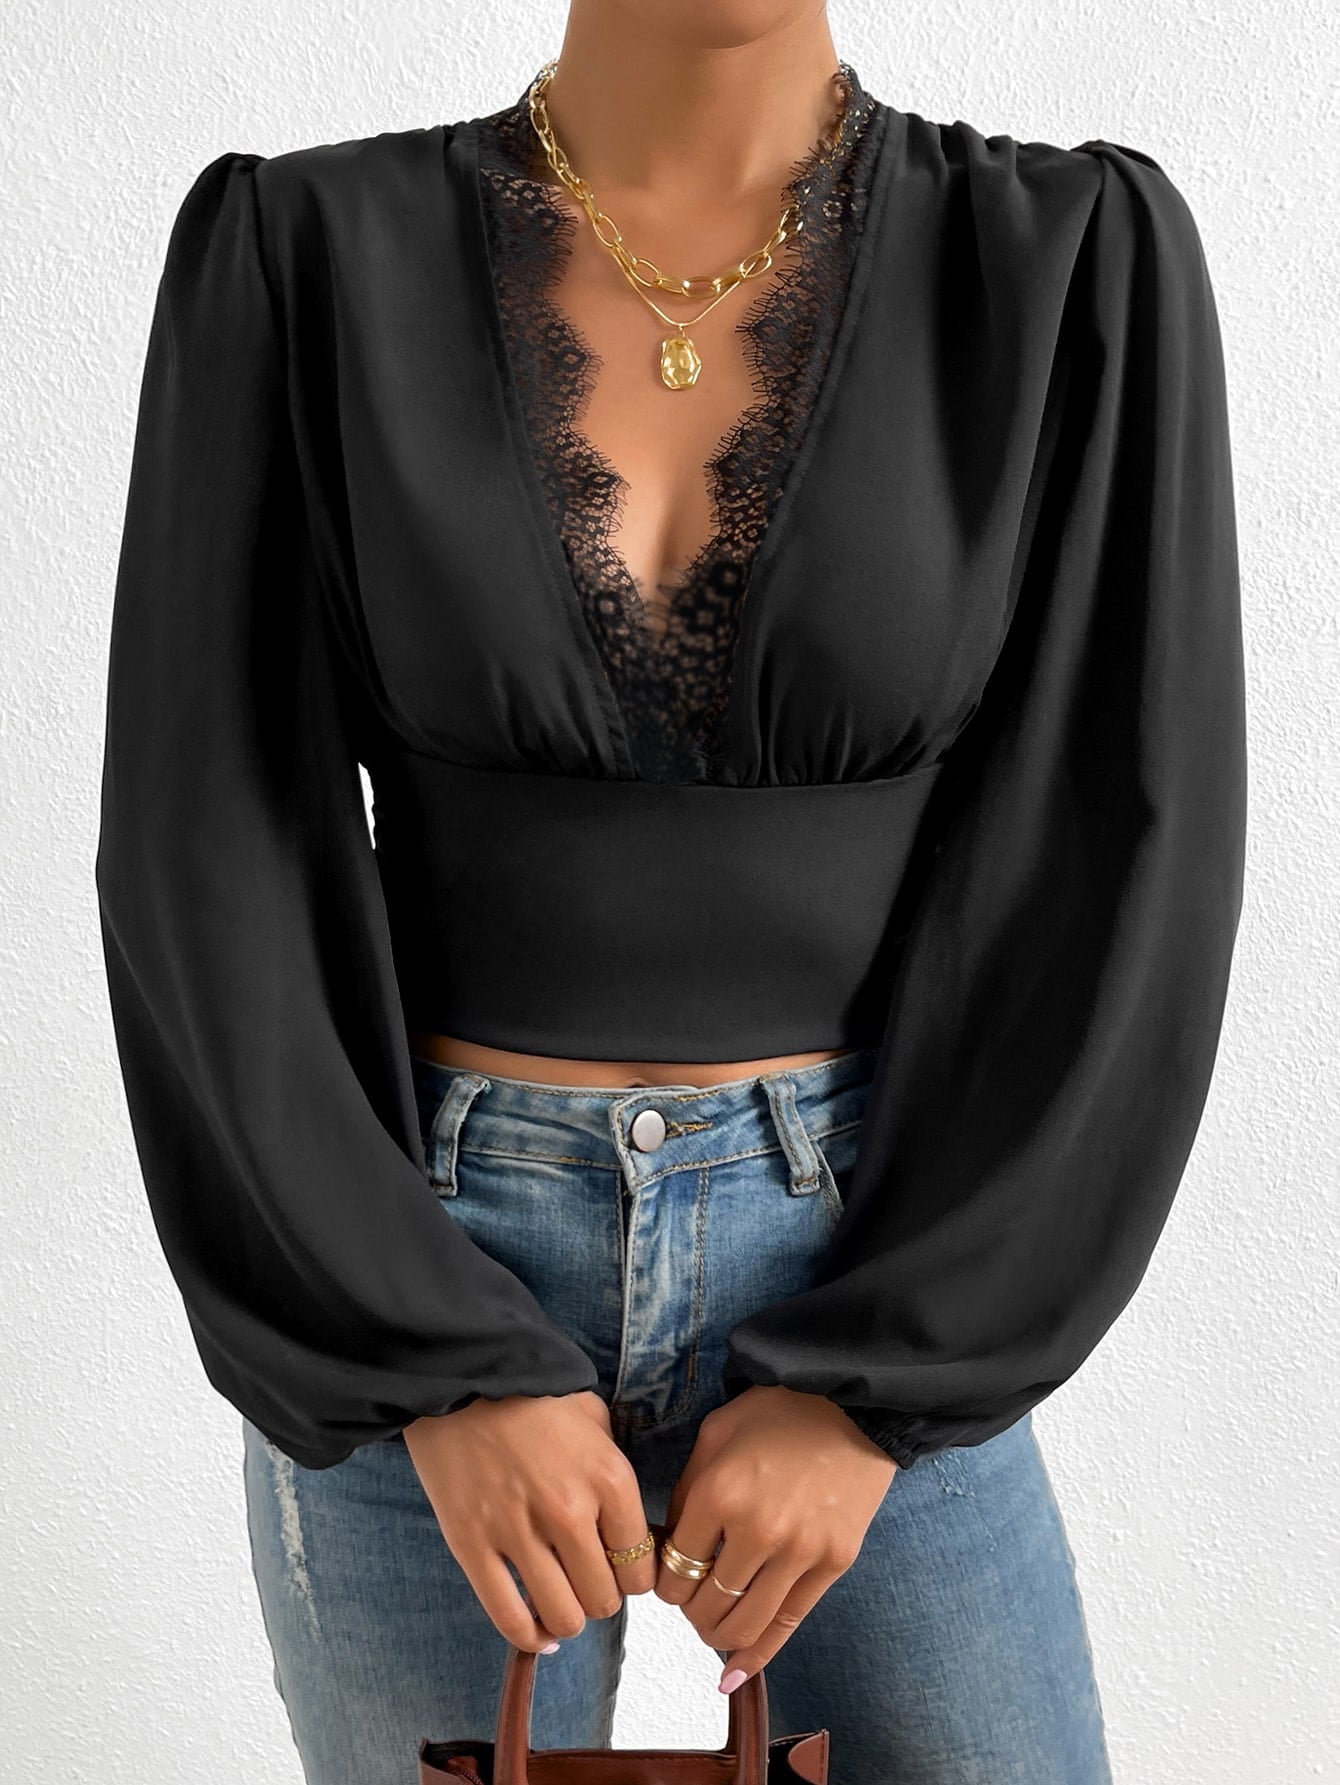 Sexy Long Sleeves Lace Tops for Women-Shirts & Tops-Black-S-Free Shipping Leatheretro